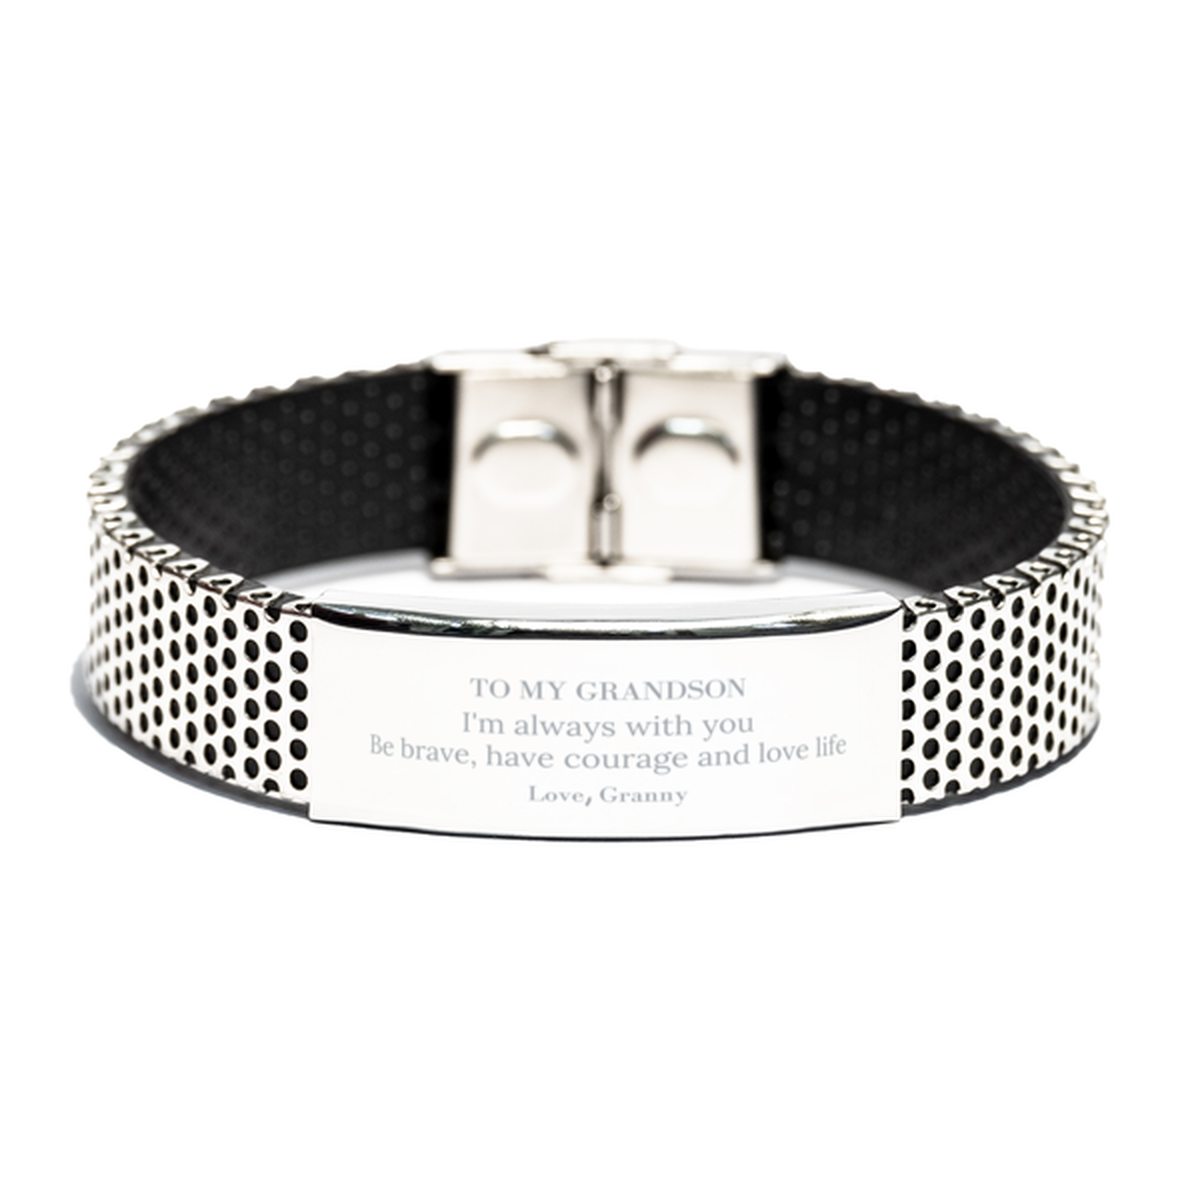 To My Grandson Gifts from Granny, Unique Stainless Steel Bracelet Inspirational Christmas Birthday Graduation Gifts for Grandson I'm always with you. Be brave, have courage and love life. Love, Granny